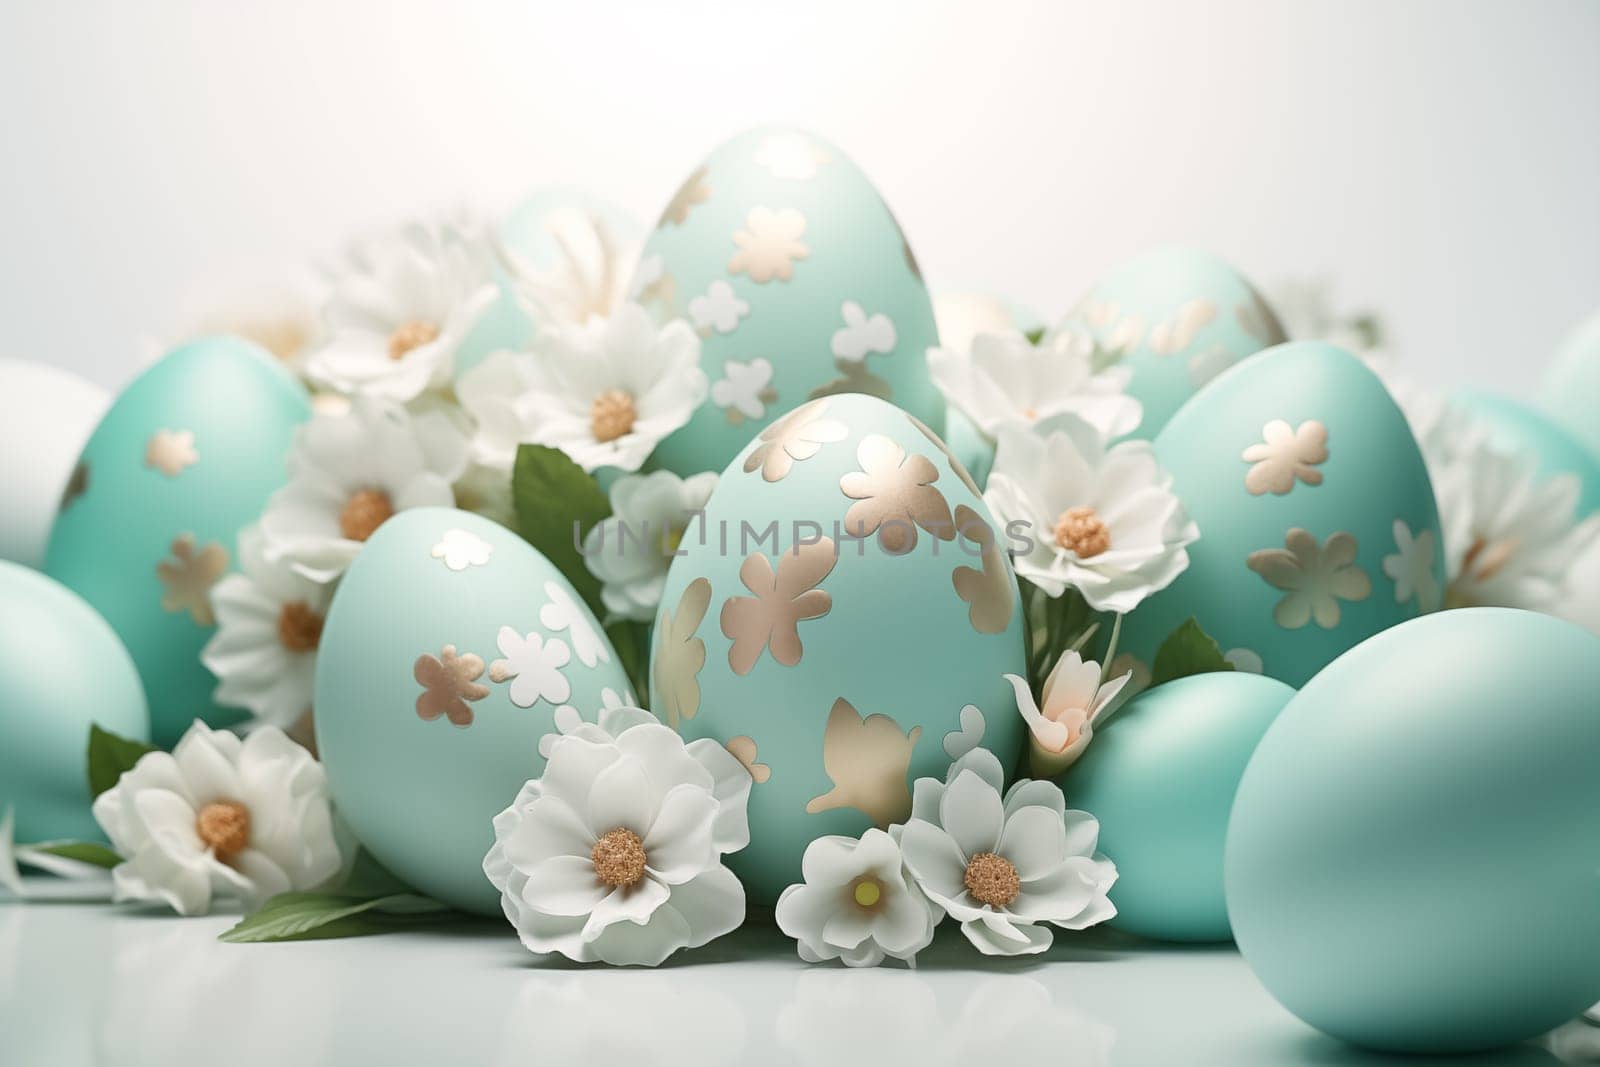 easter eggs and flowers,light background mint large giant pastel eggs,easter eggs with flowers by Nadtochiy